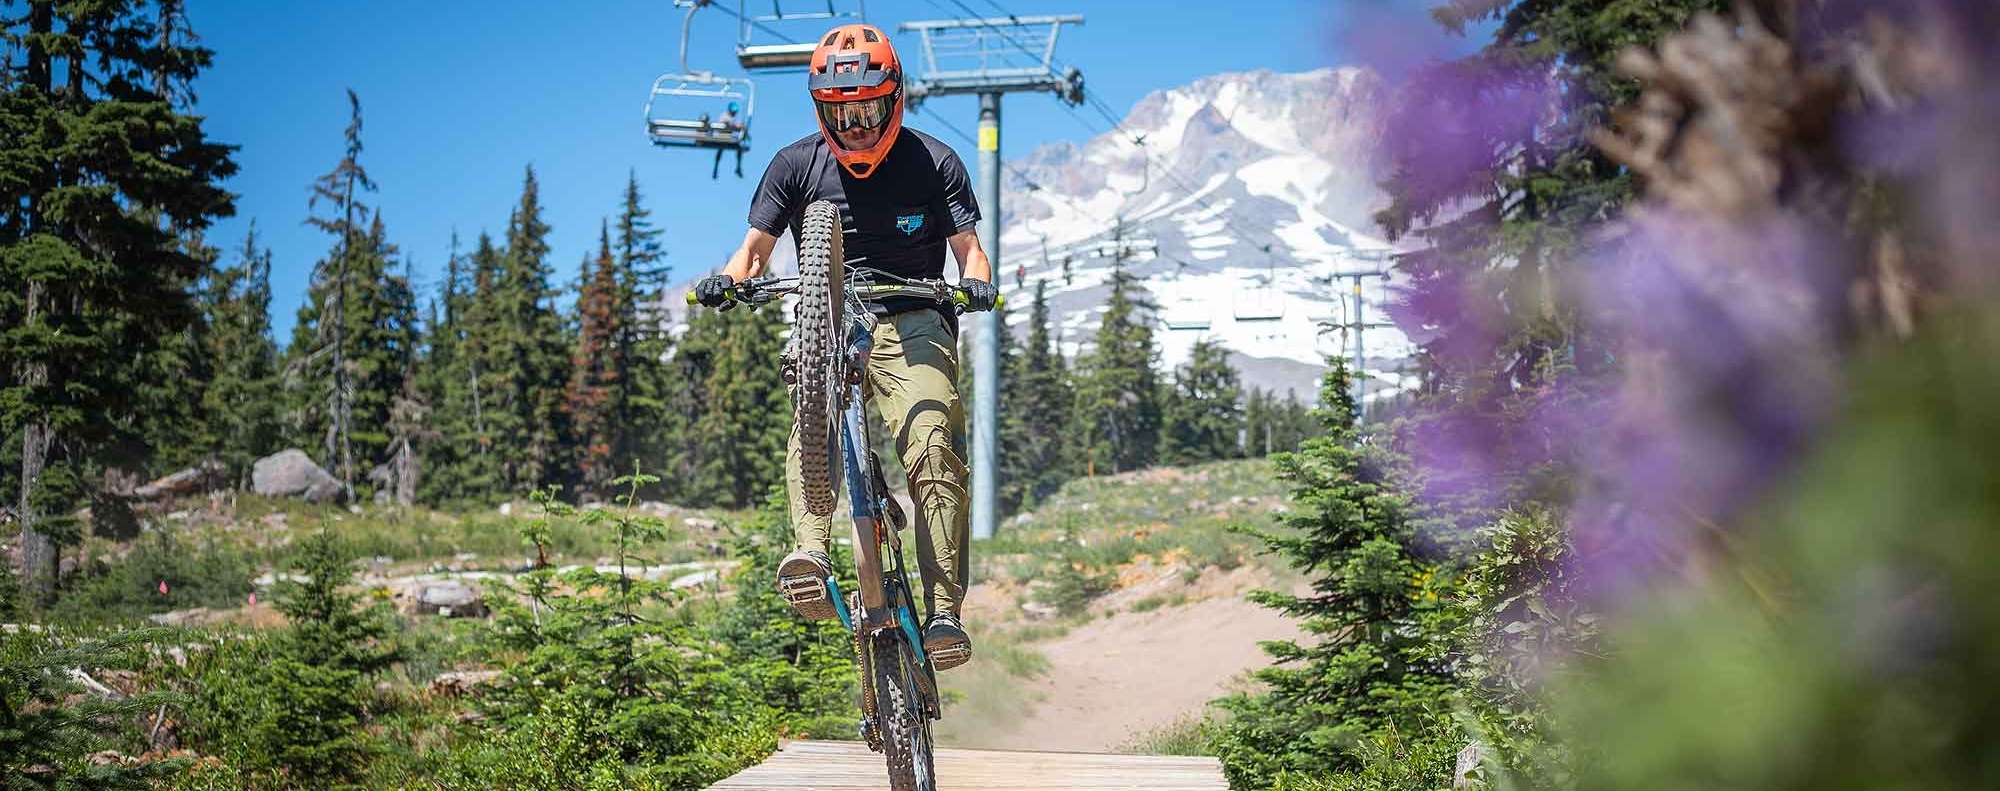 TIMBERLINE BIKE PARK MOUNTAIN BIKER POPPING A WHEELIE ON A BRIDGE WITH MT. HOOD IN THE BACKGROUND